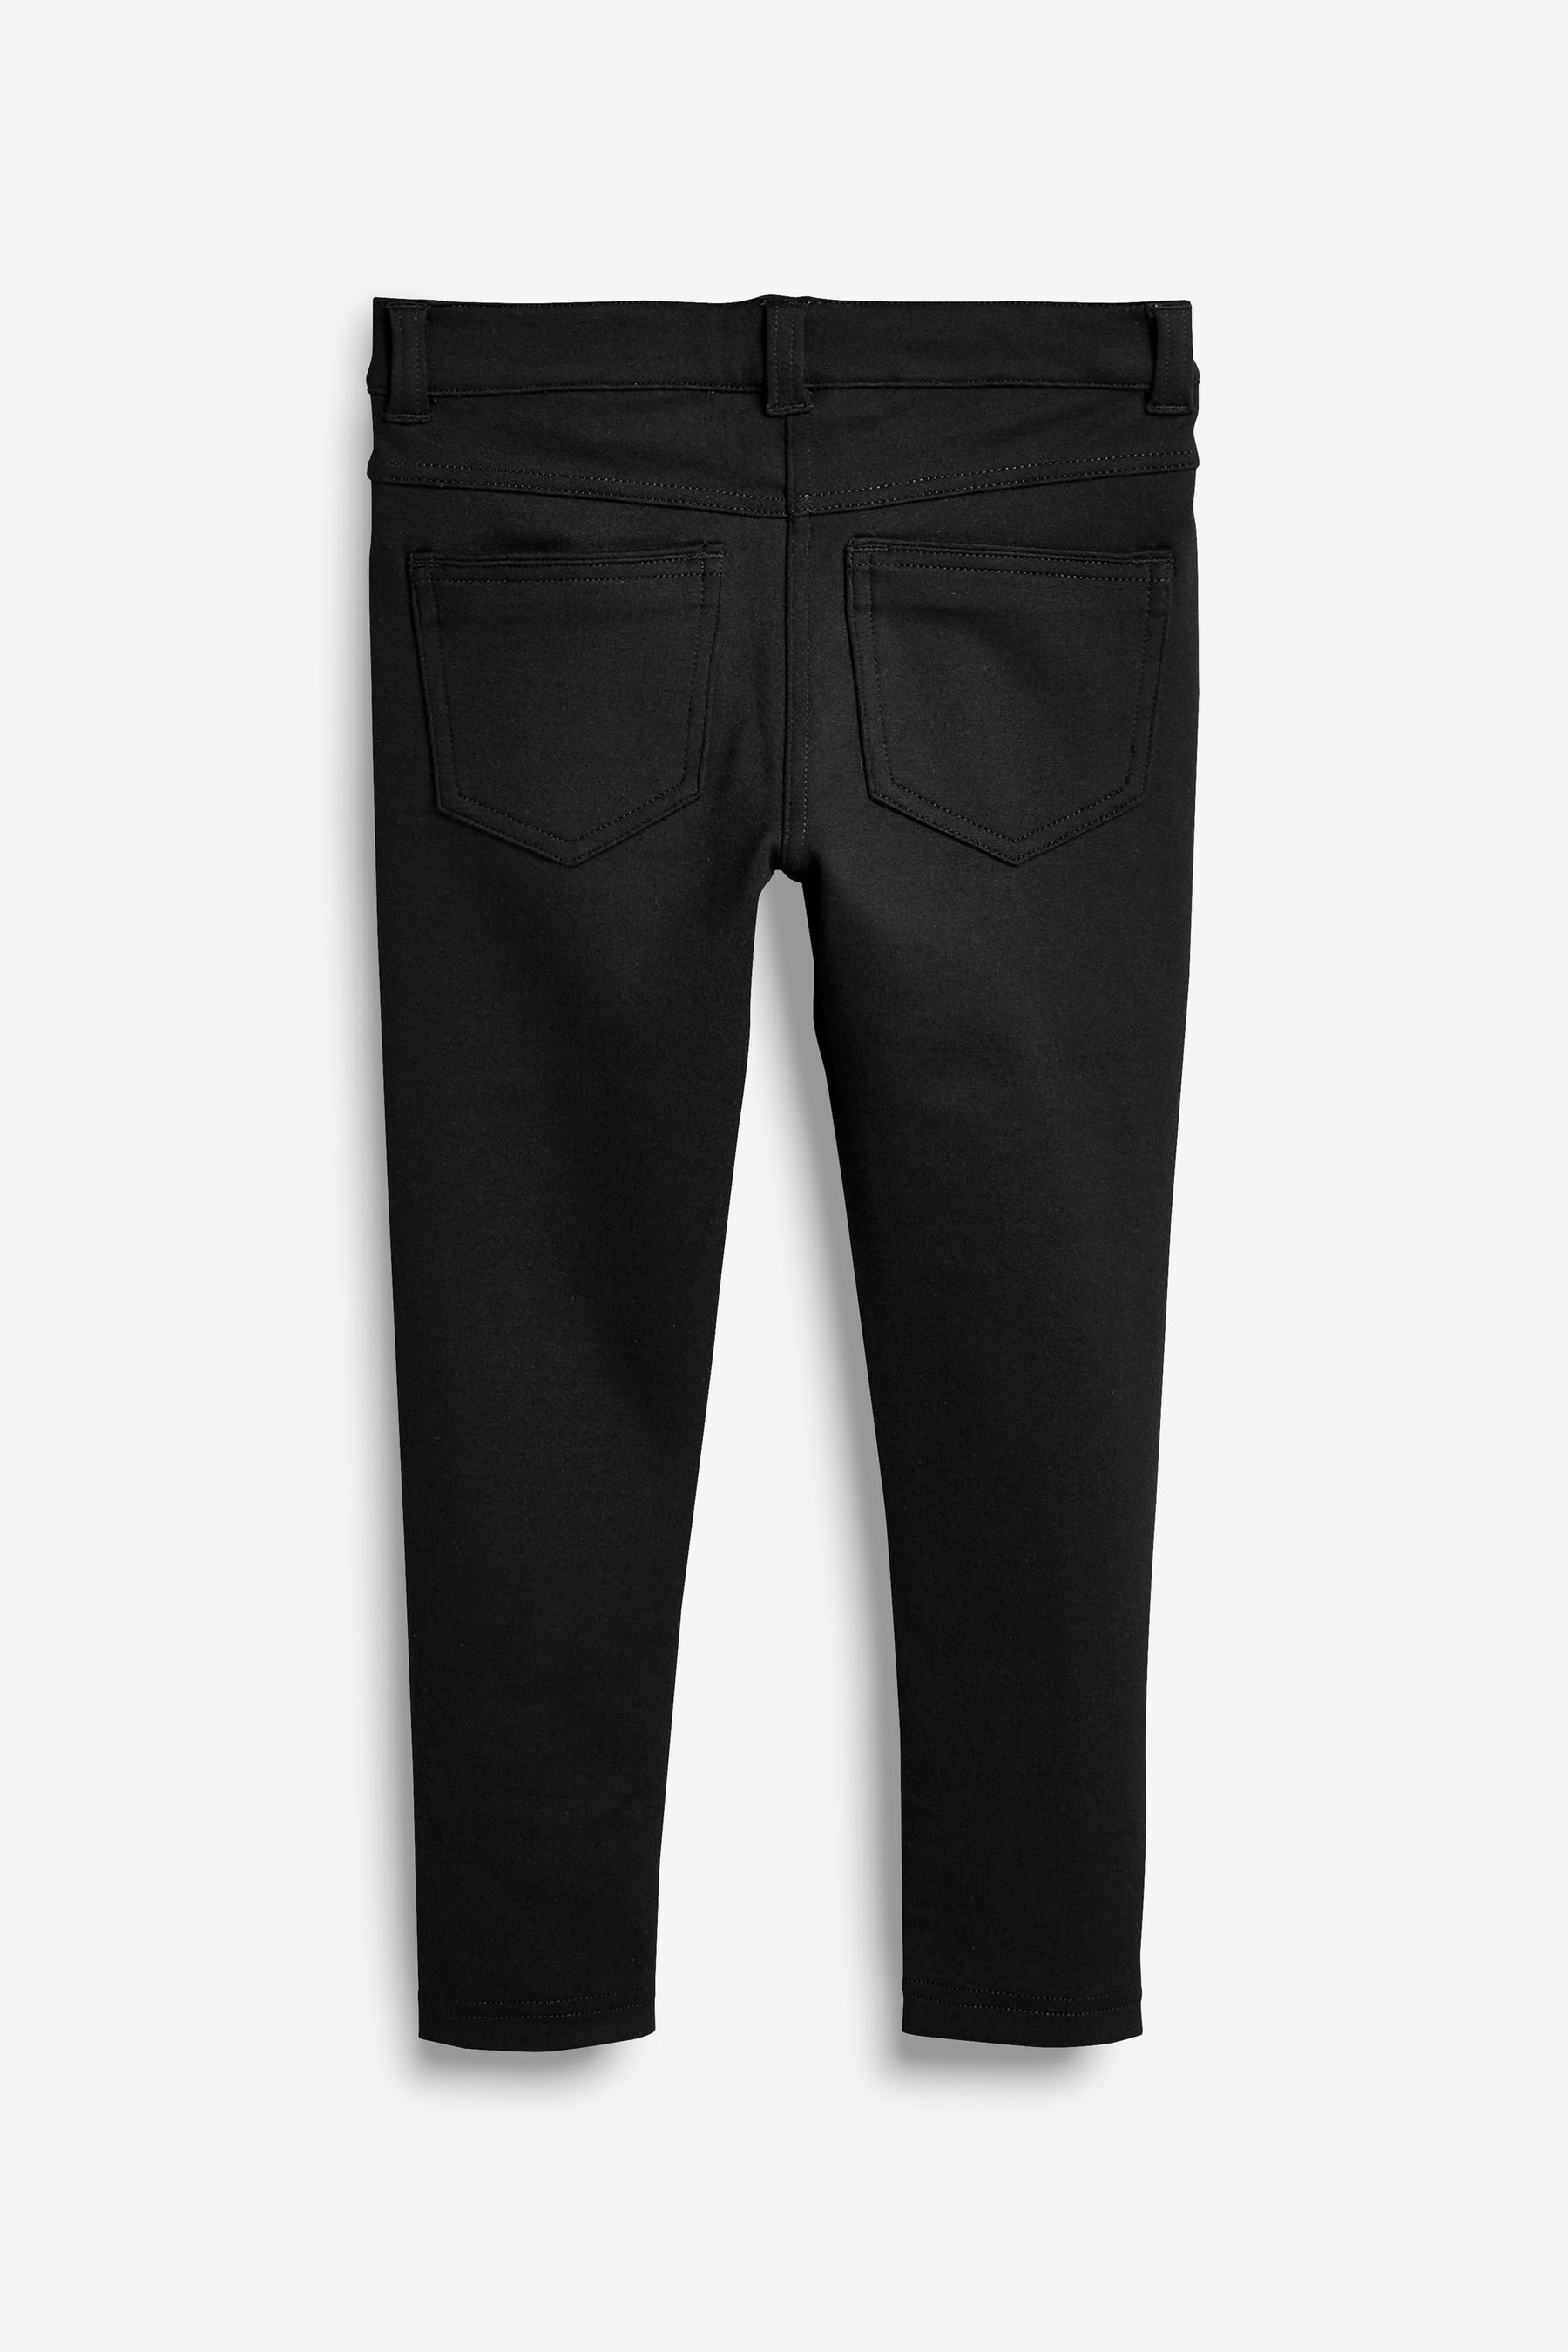 Buy Black Jersey Stretch Skinny Trousers (3-18yrs) from the Next UK ...